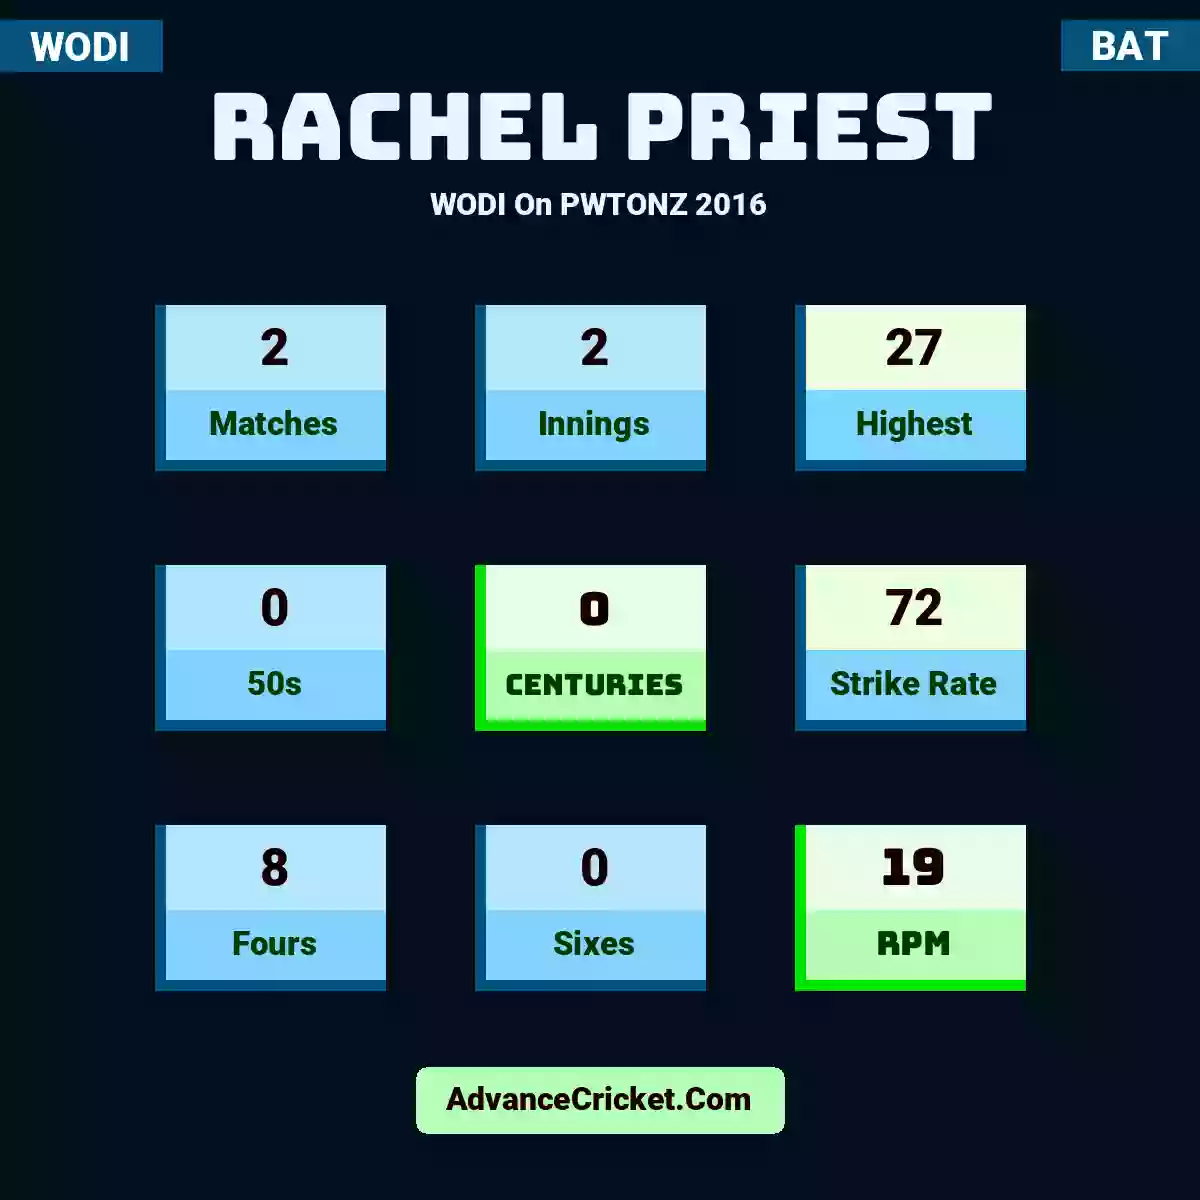 Rachel Priest WODI  On PWTONZ 2016, Rachel Priest played 2 matches, scored 27 runs as highest, 0 half-centuries, and 0 centuries, with a strike rate of 72. R.Priest hit 8 fours and 0 sixes, with an RPM of 19.